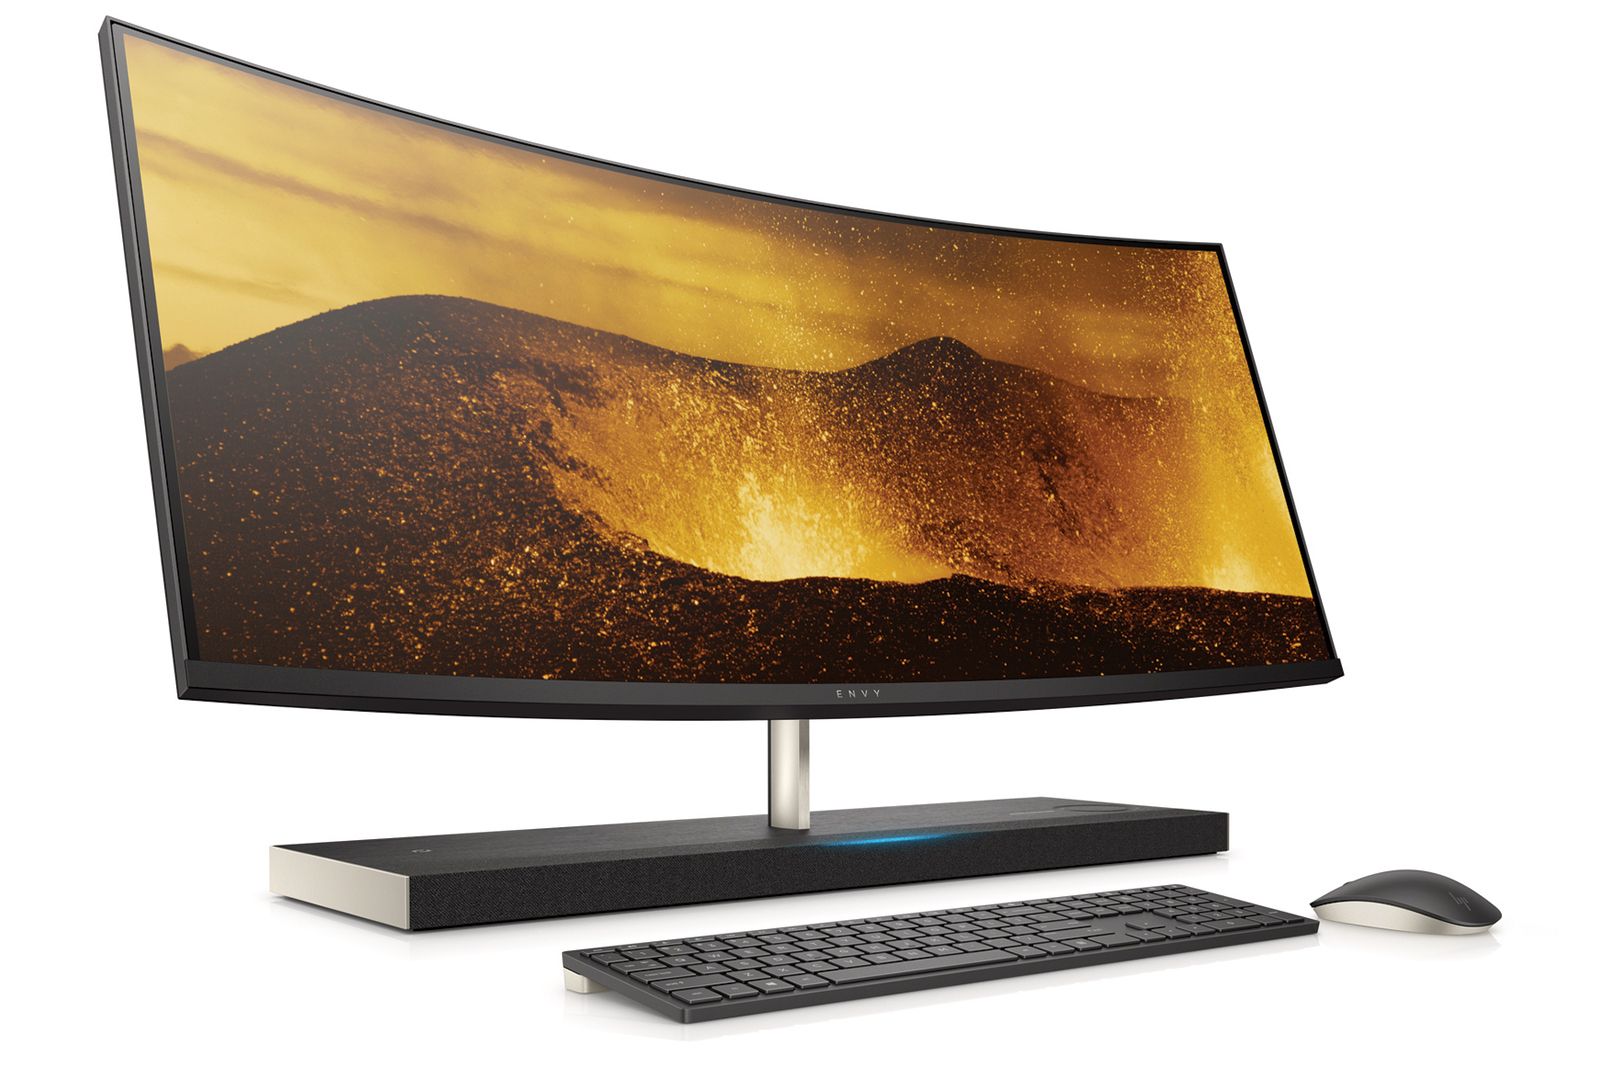 HP’s new Envy All-in-One is world’s first with Amazon Alexa image 1